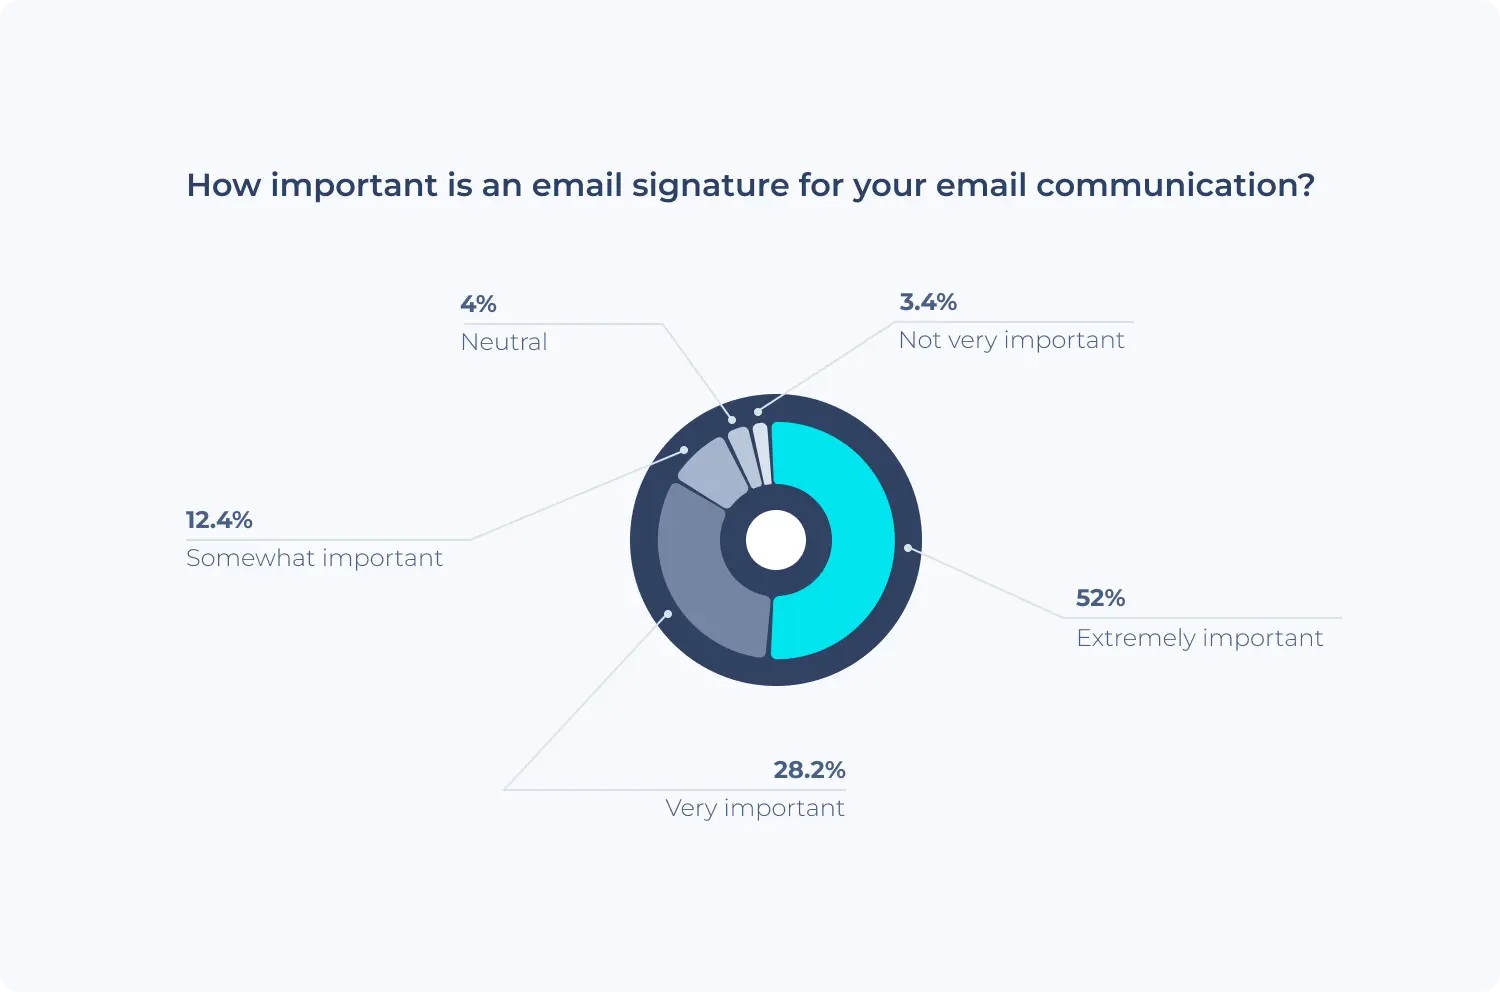 Email Signatures, how important they are for your email communication